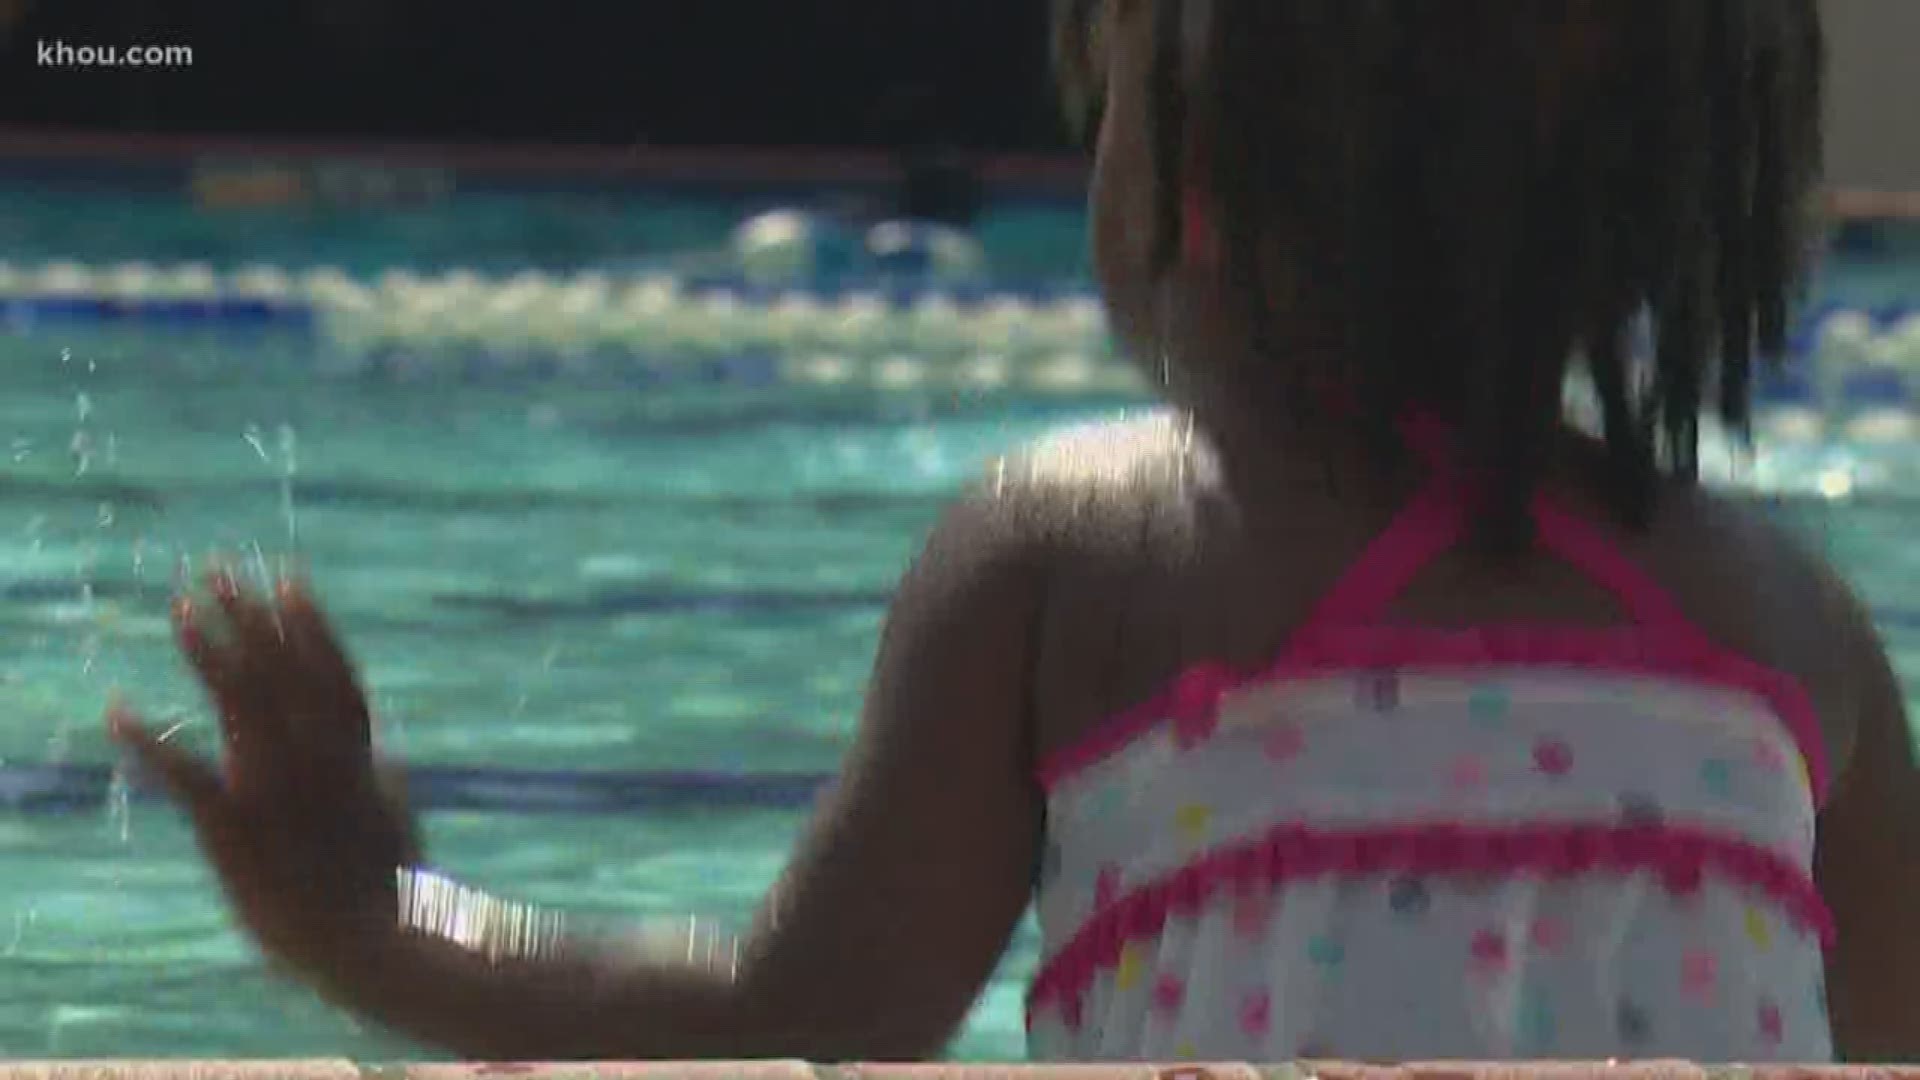 Here are some tips to keep in mind to make sure your loved ones are safe at swimming pools.